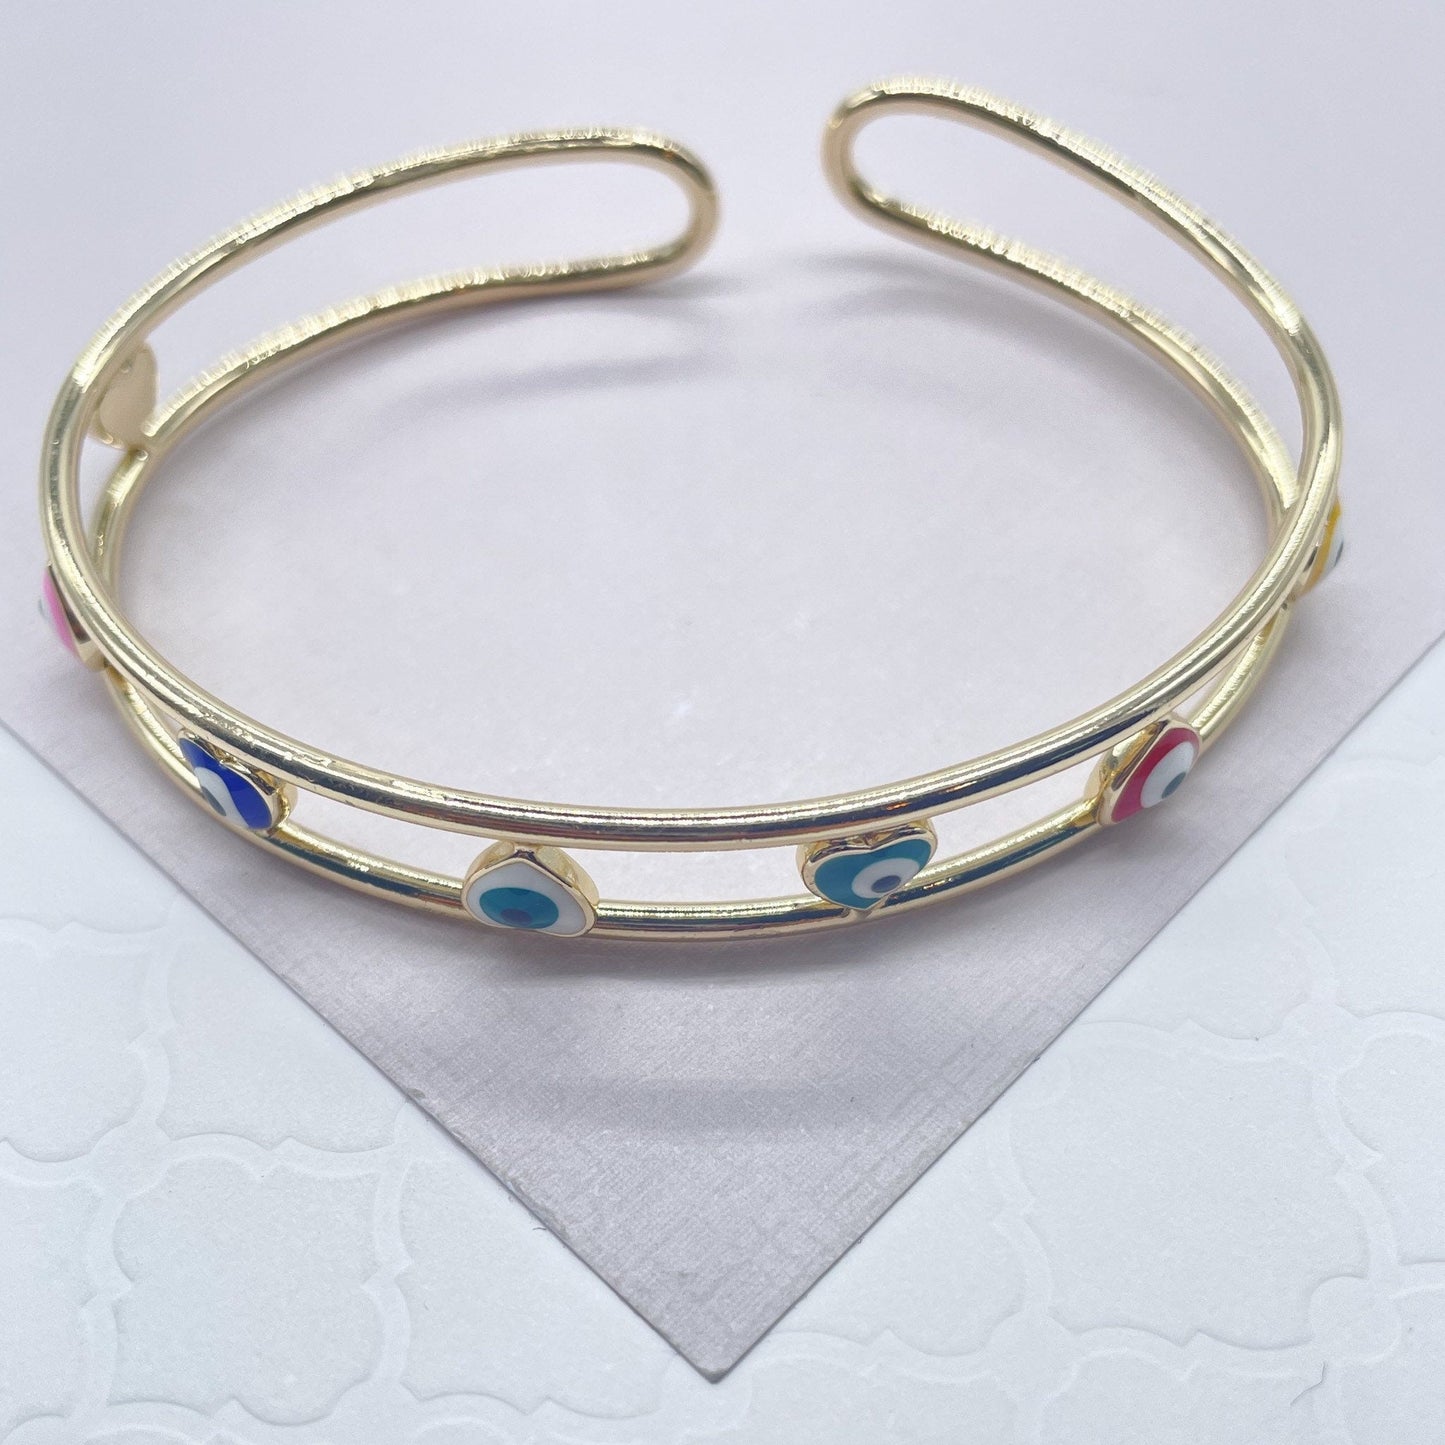 18k Gold Layered Colorful Evil Eye Cuff Bracelets Featuring Flower, Heart or